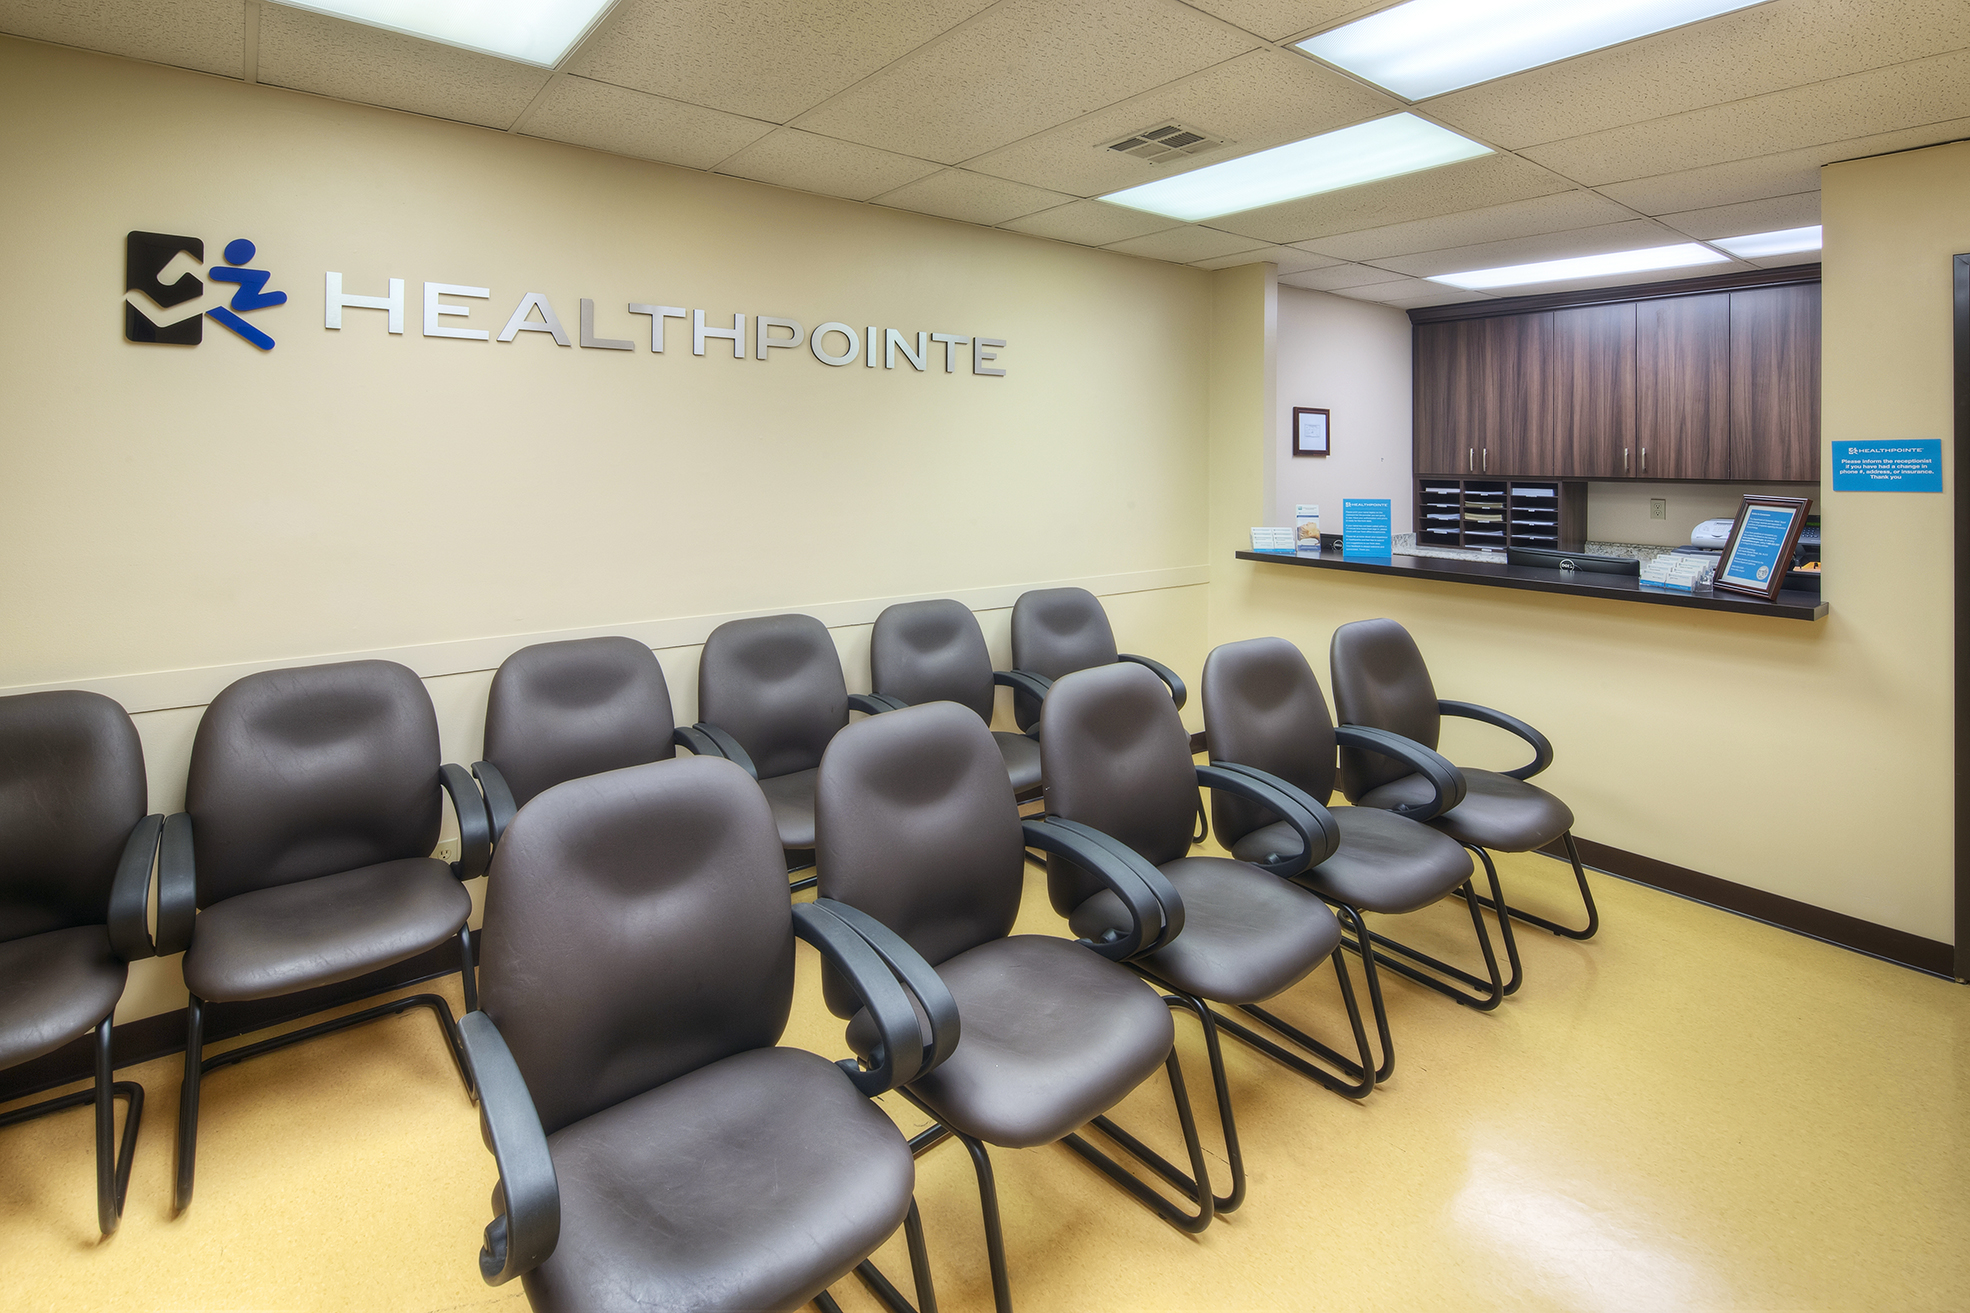 The Covid Recovery Program at Healthpointe in Los Angeles